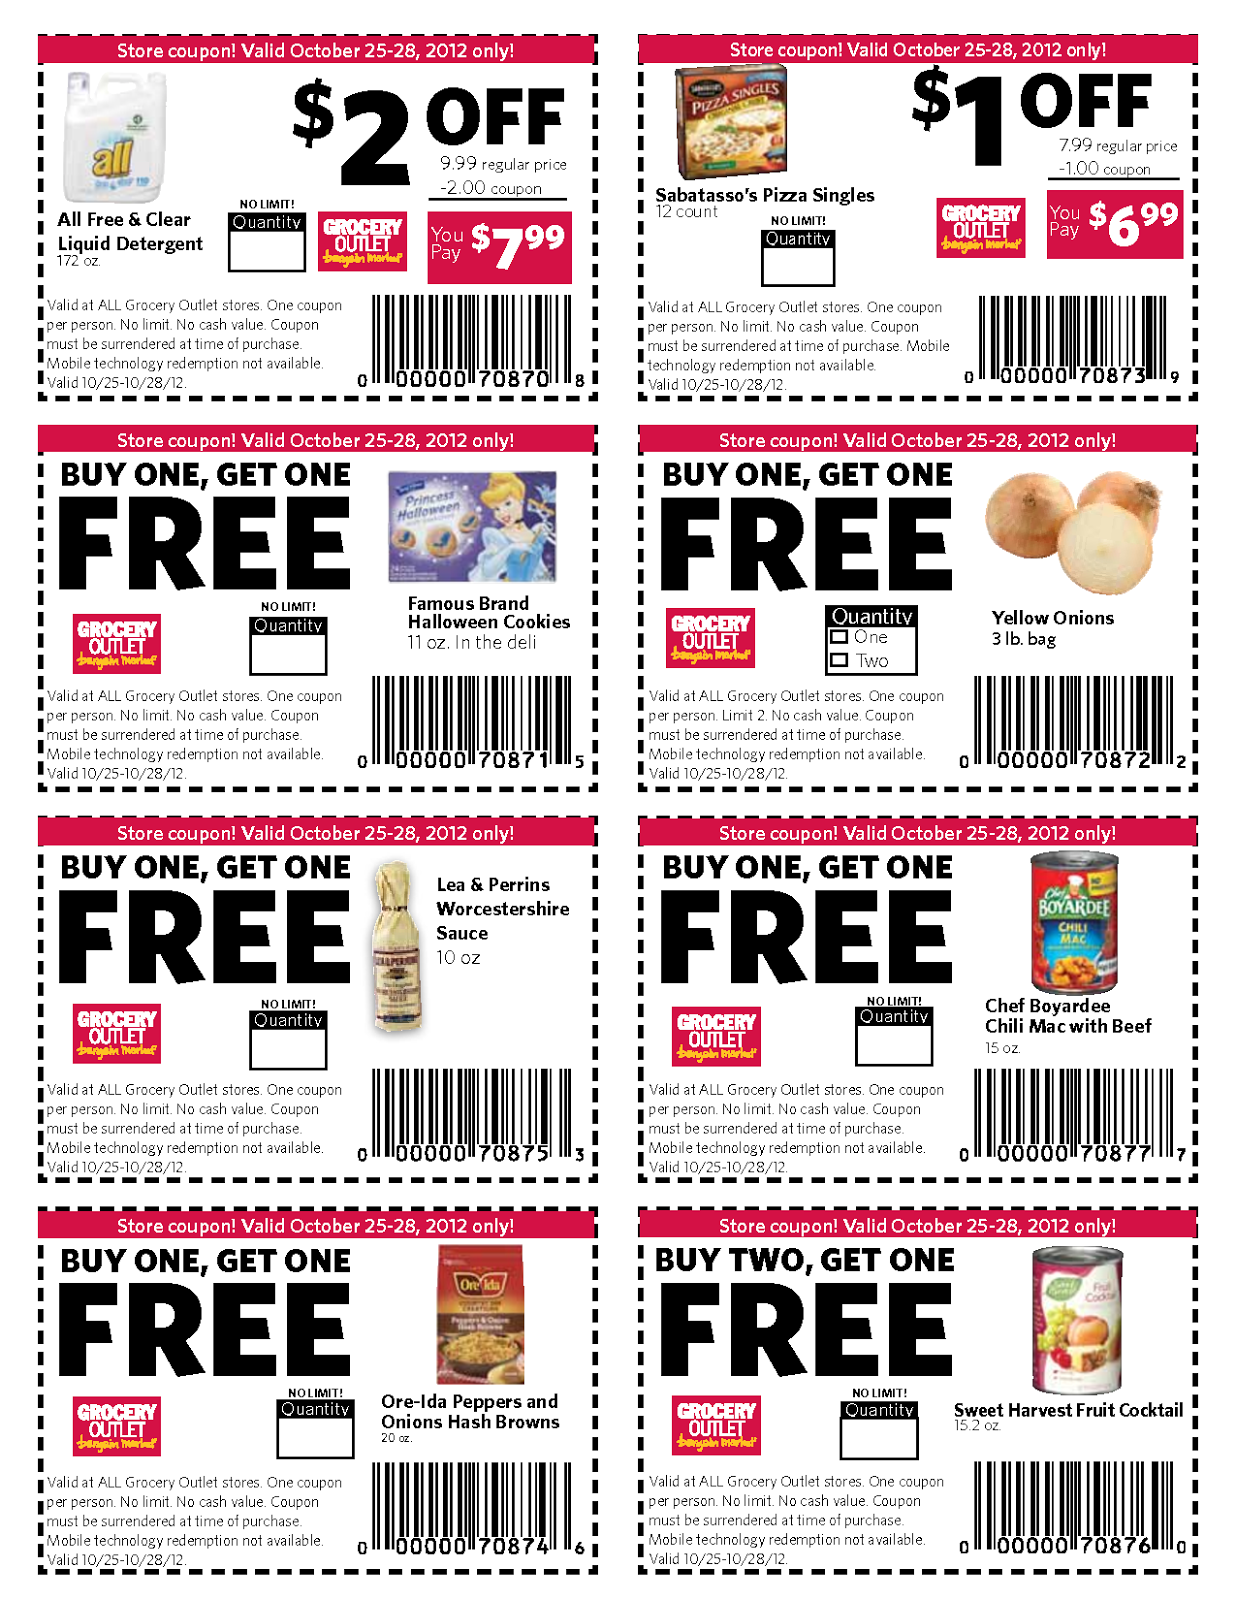 coupon-template-for-pages-best-wallpaper